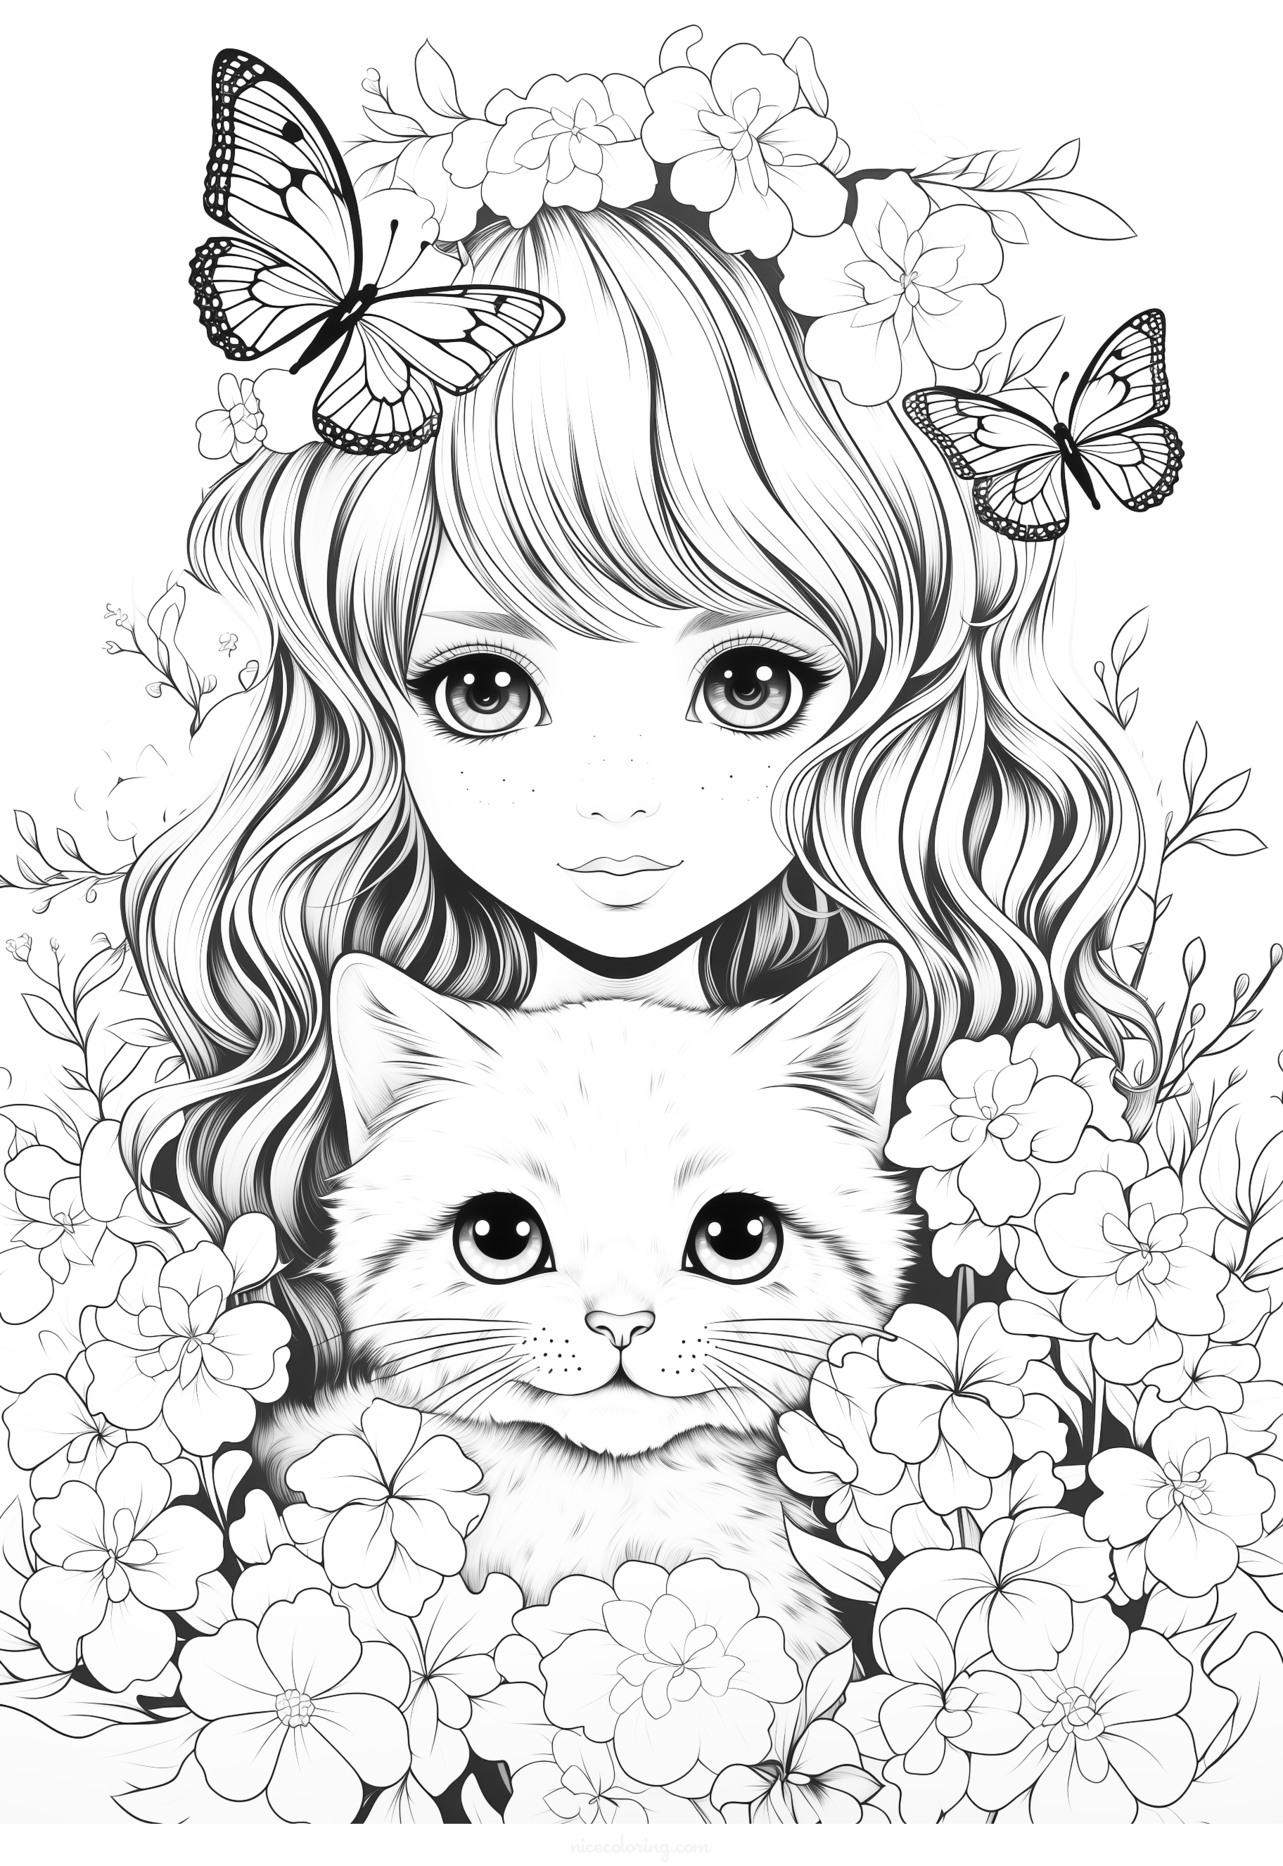 A cute cat sitting with a playful expression ready to be colored